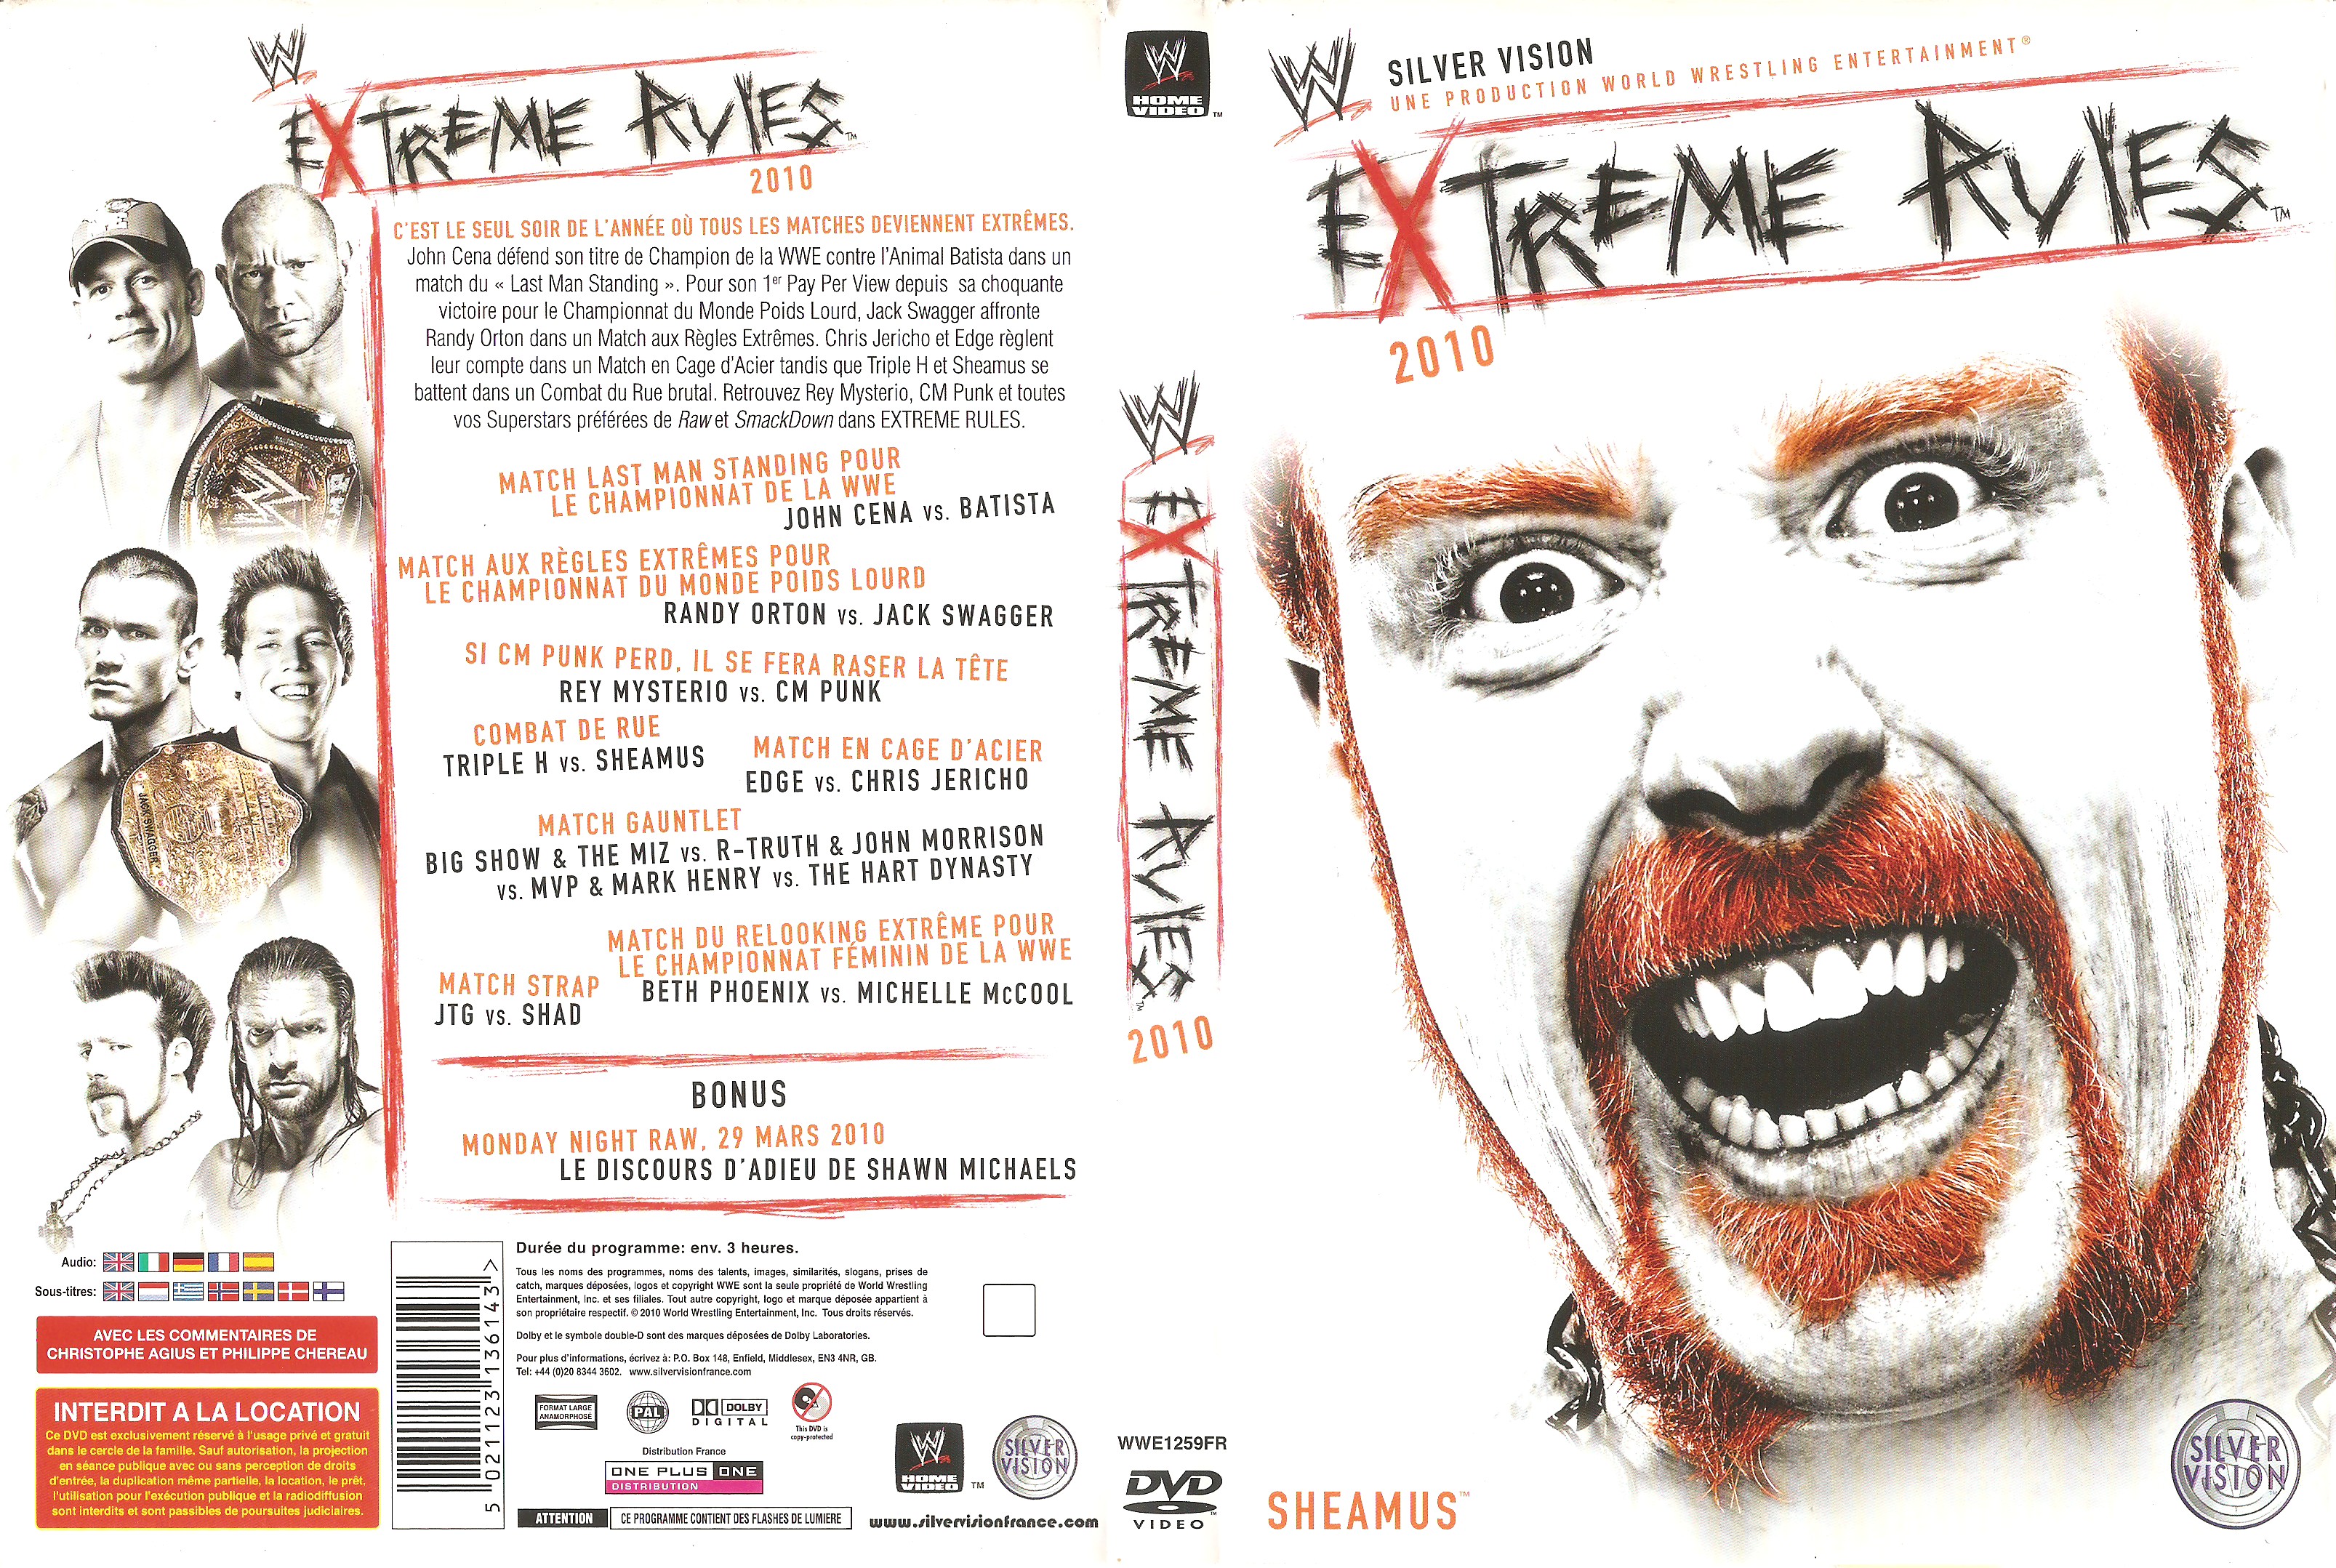 Jaquette DVD WWE Extreme Rules 2010